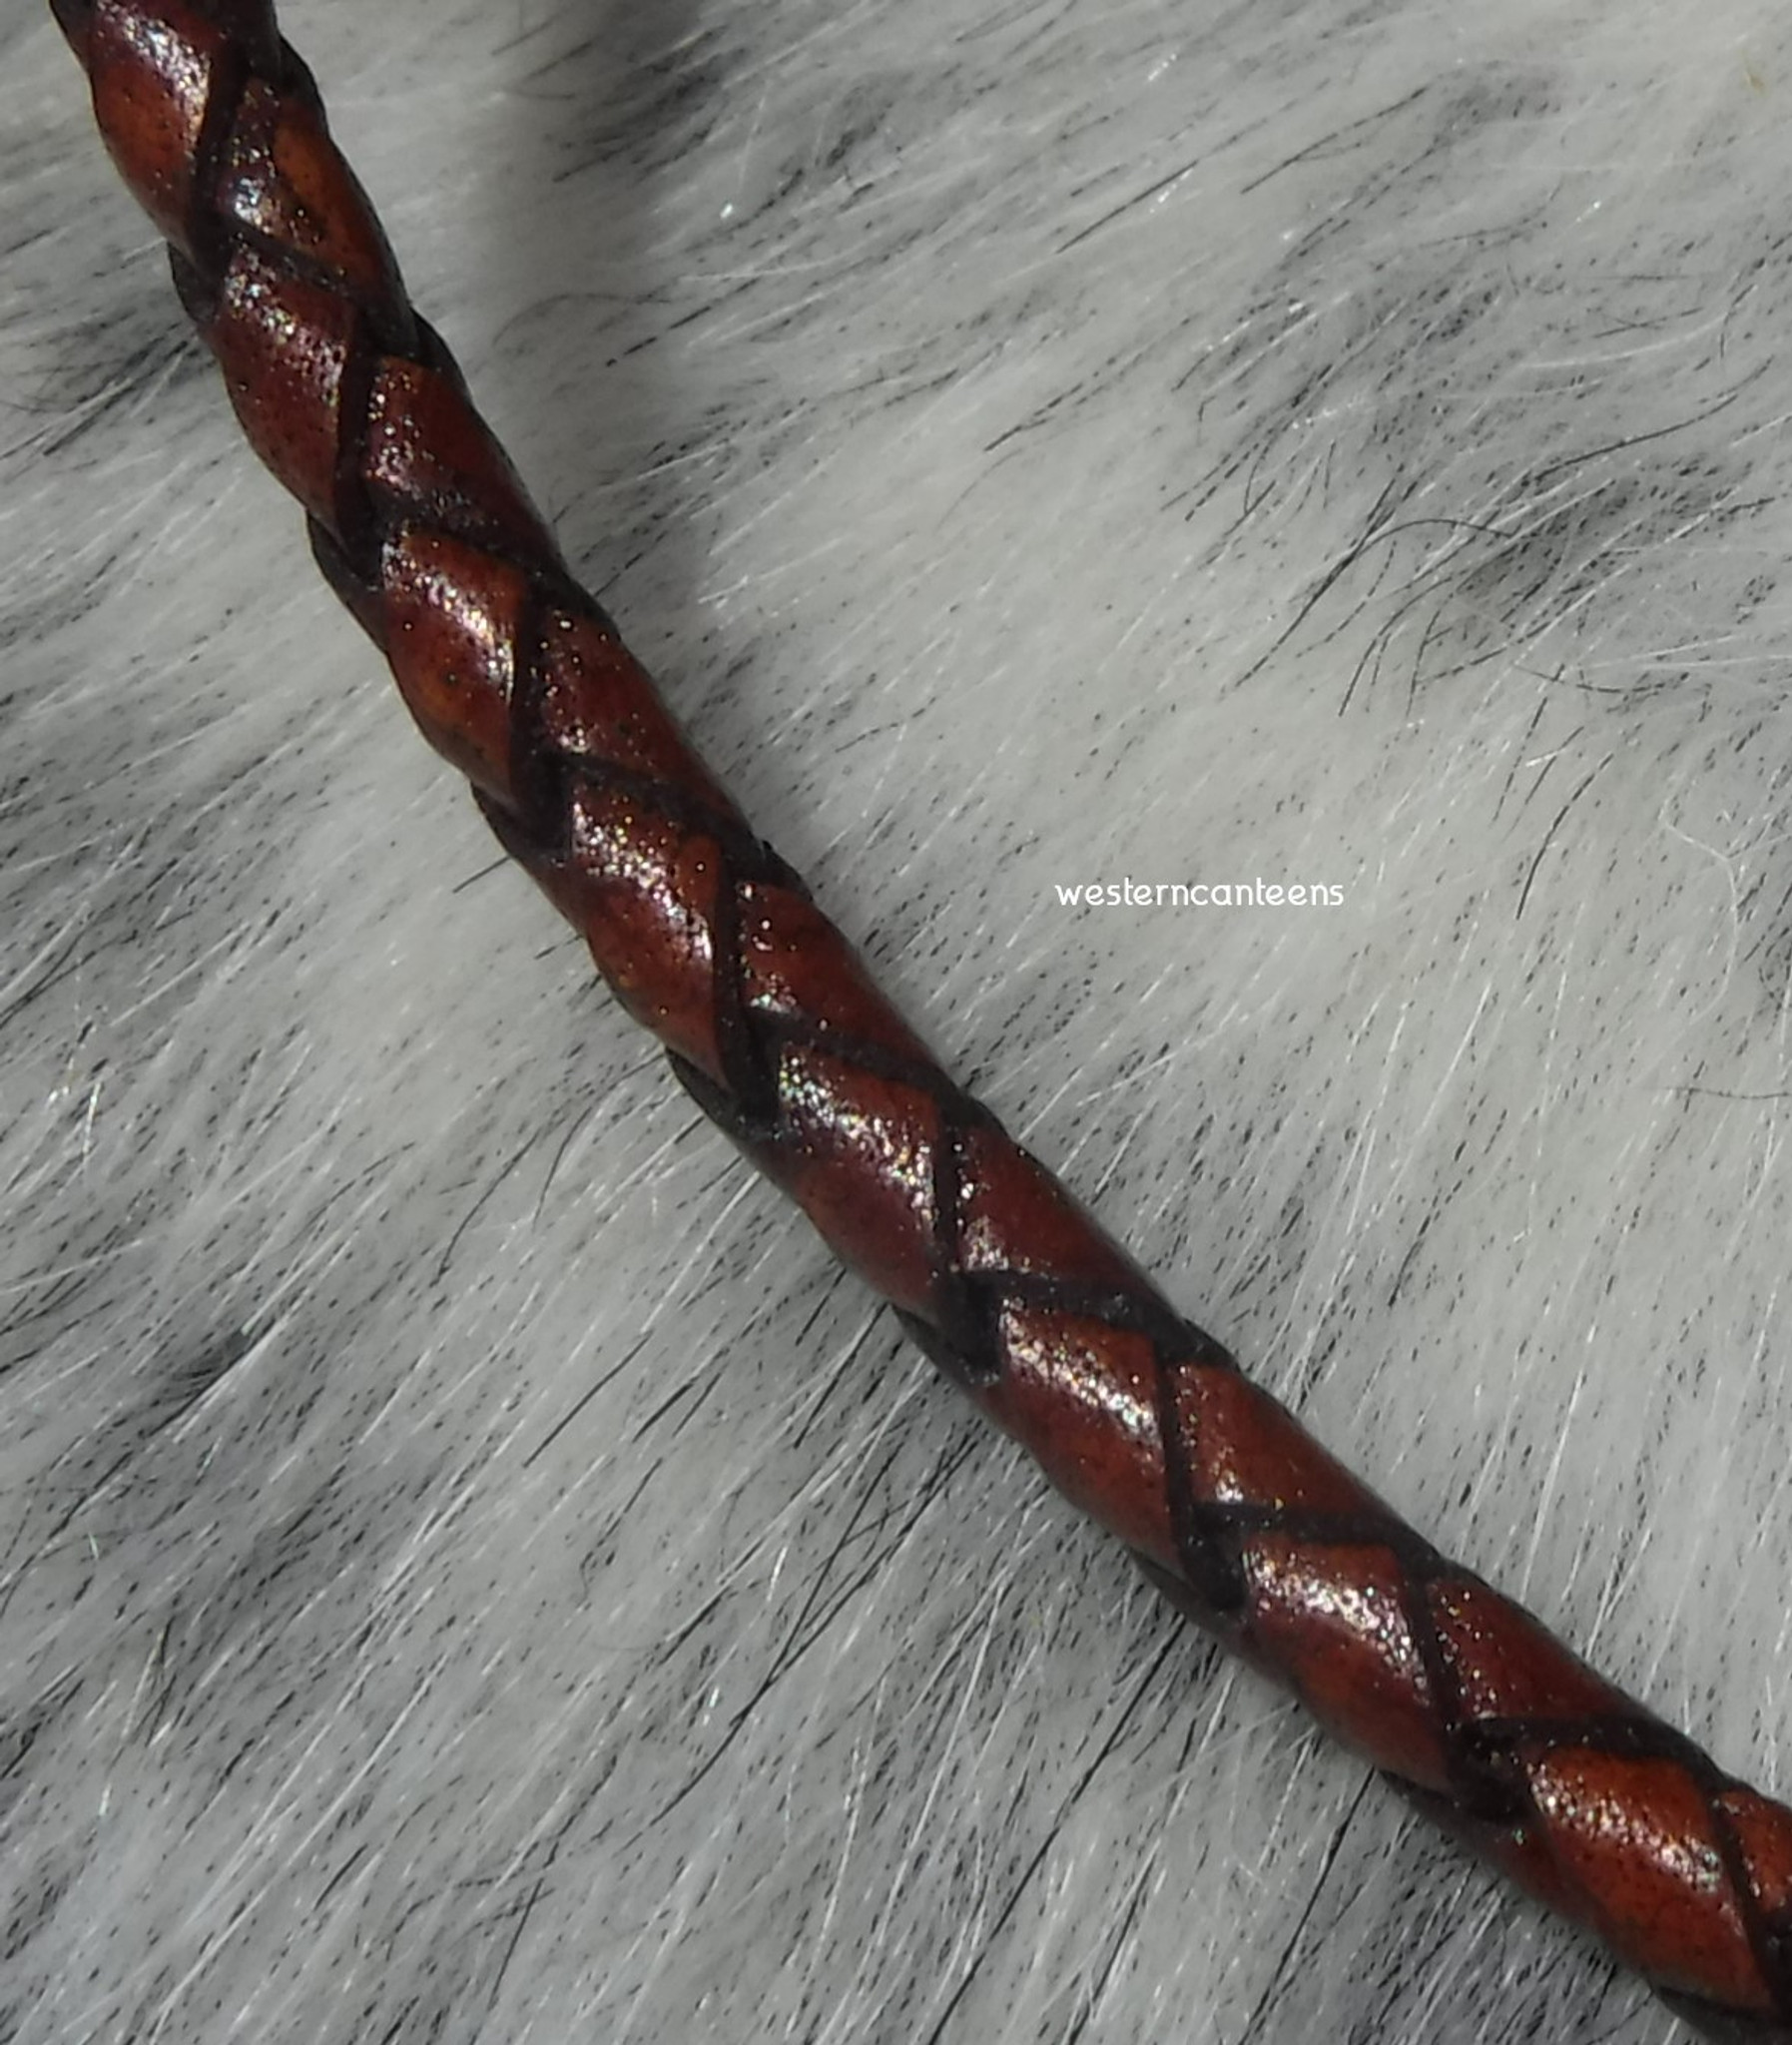 Antique Brown Braided Necklace 4 MM - Sizes 14-28 - Western Canteens